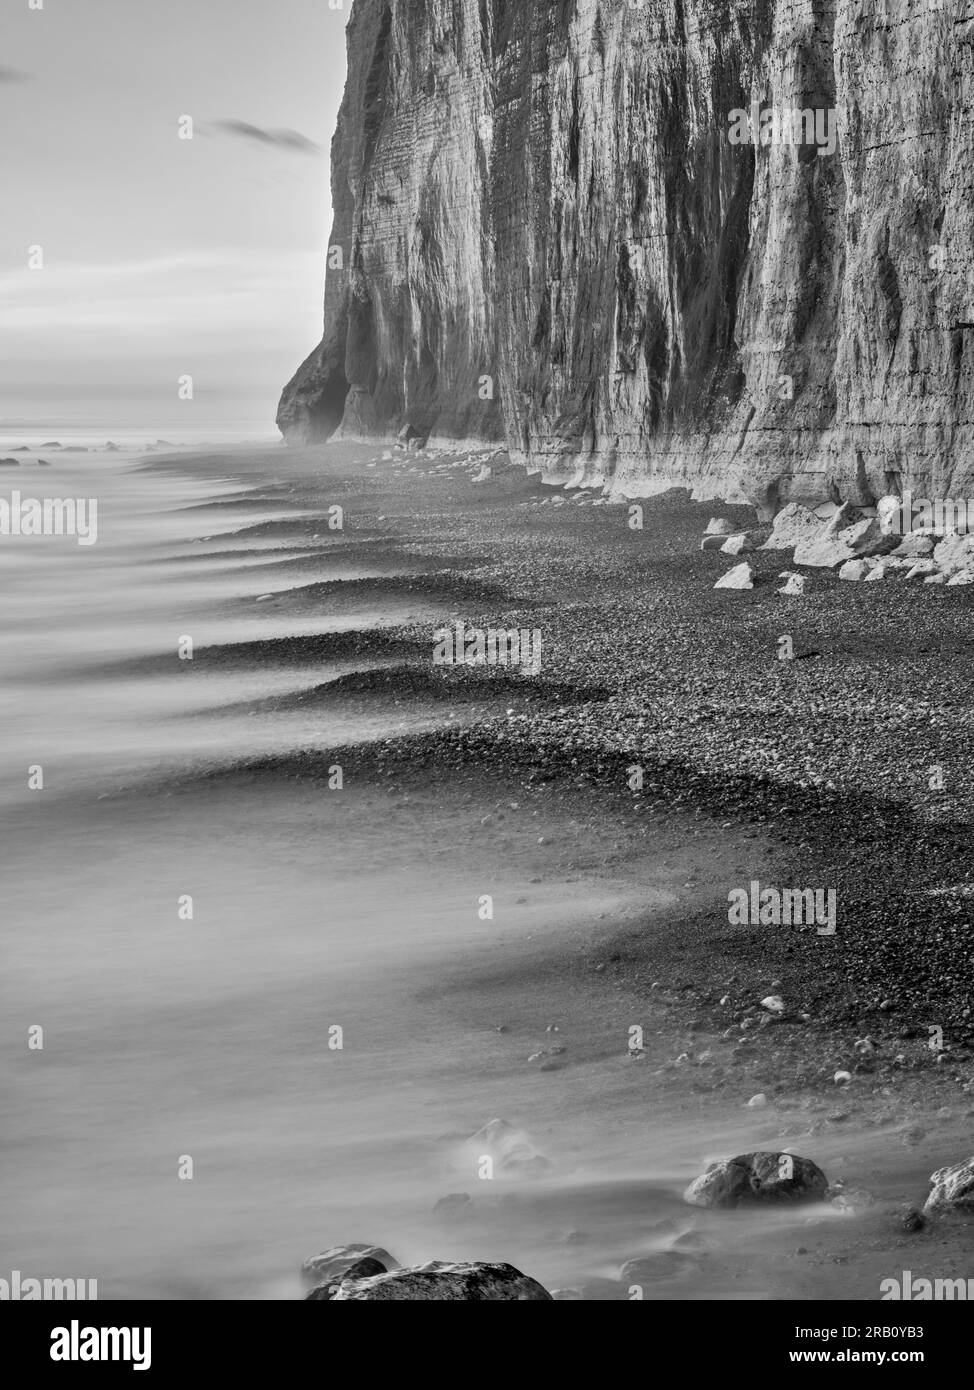 cliff, chalk coast, chalk cliffs, worth seeing, sight, scenic beauty scenic place, impressionism, beach, stone, stony beach, cliff, chalk wall, surf, wave, water Stock Photo